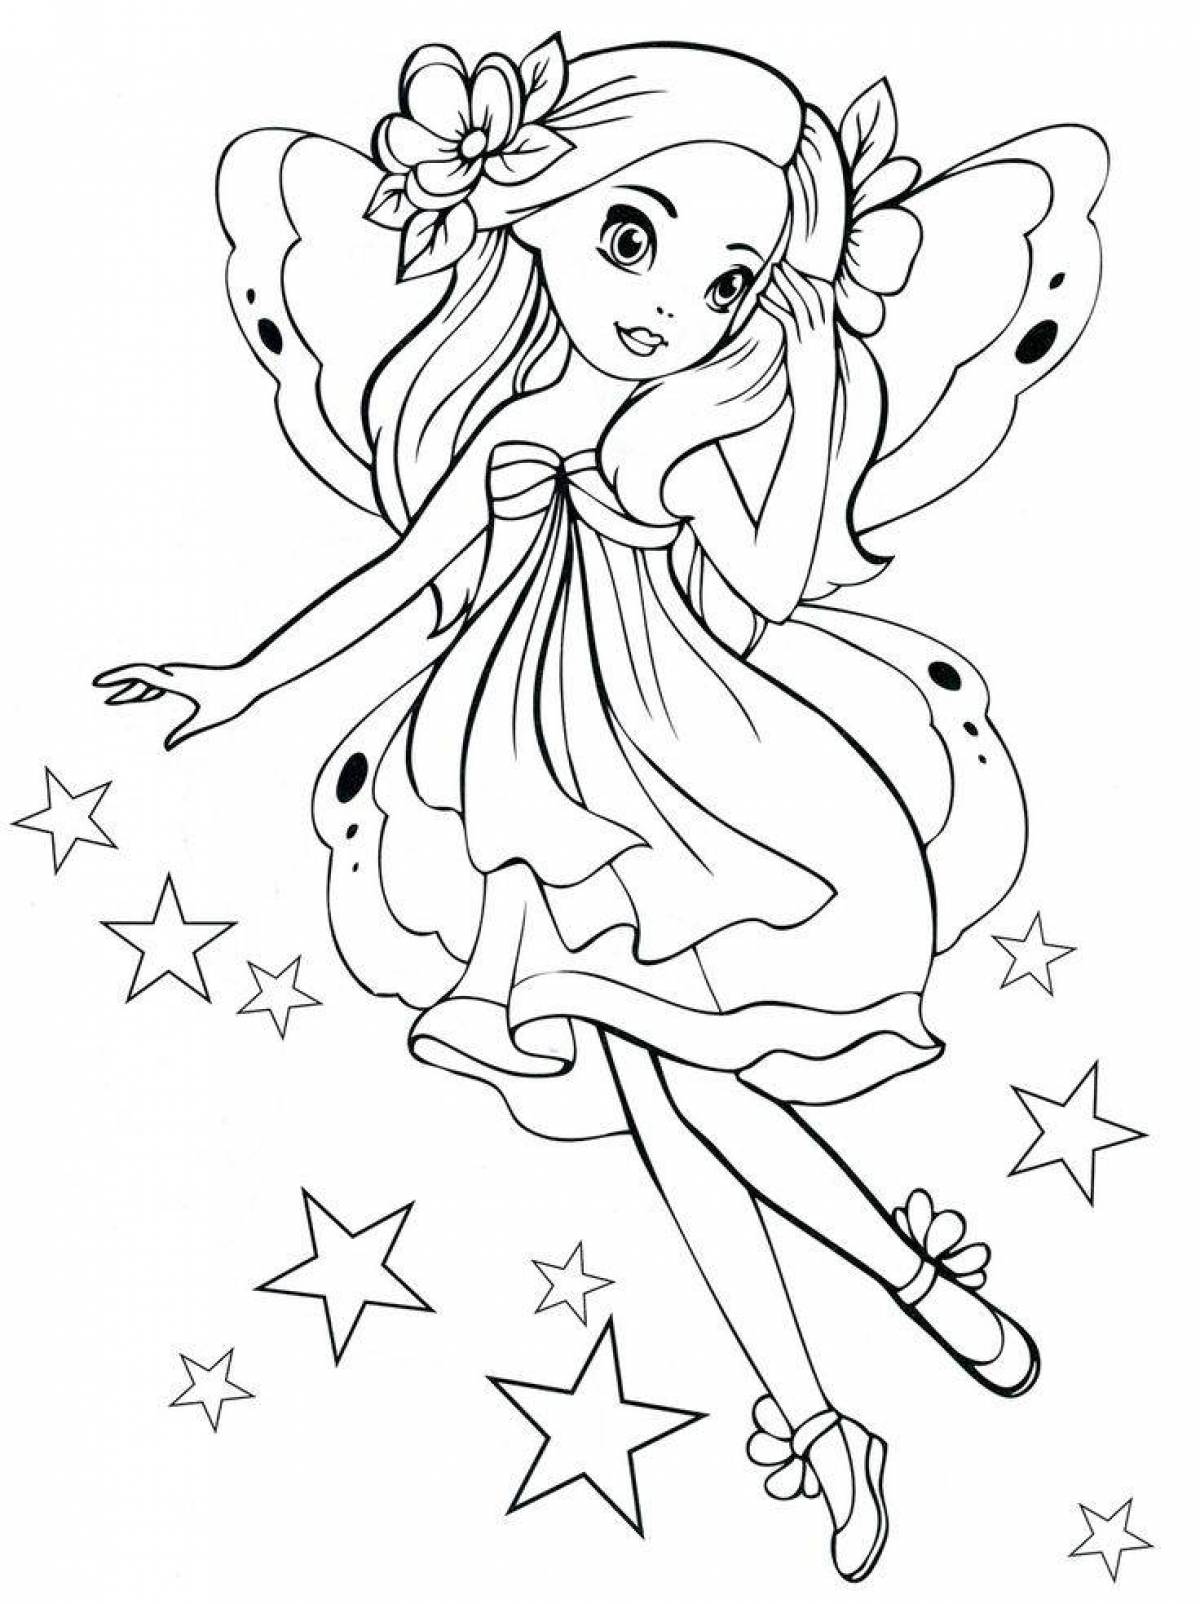 Shining fairy coloring book for kids